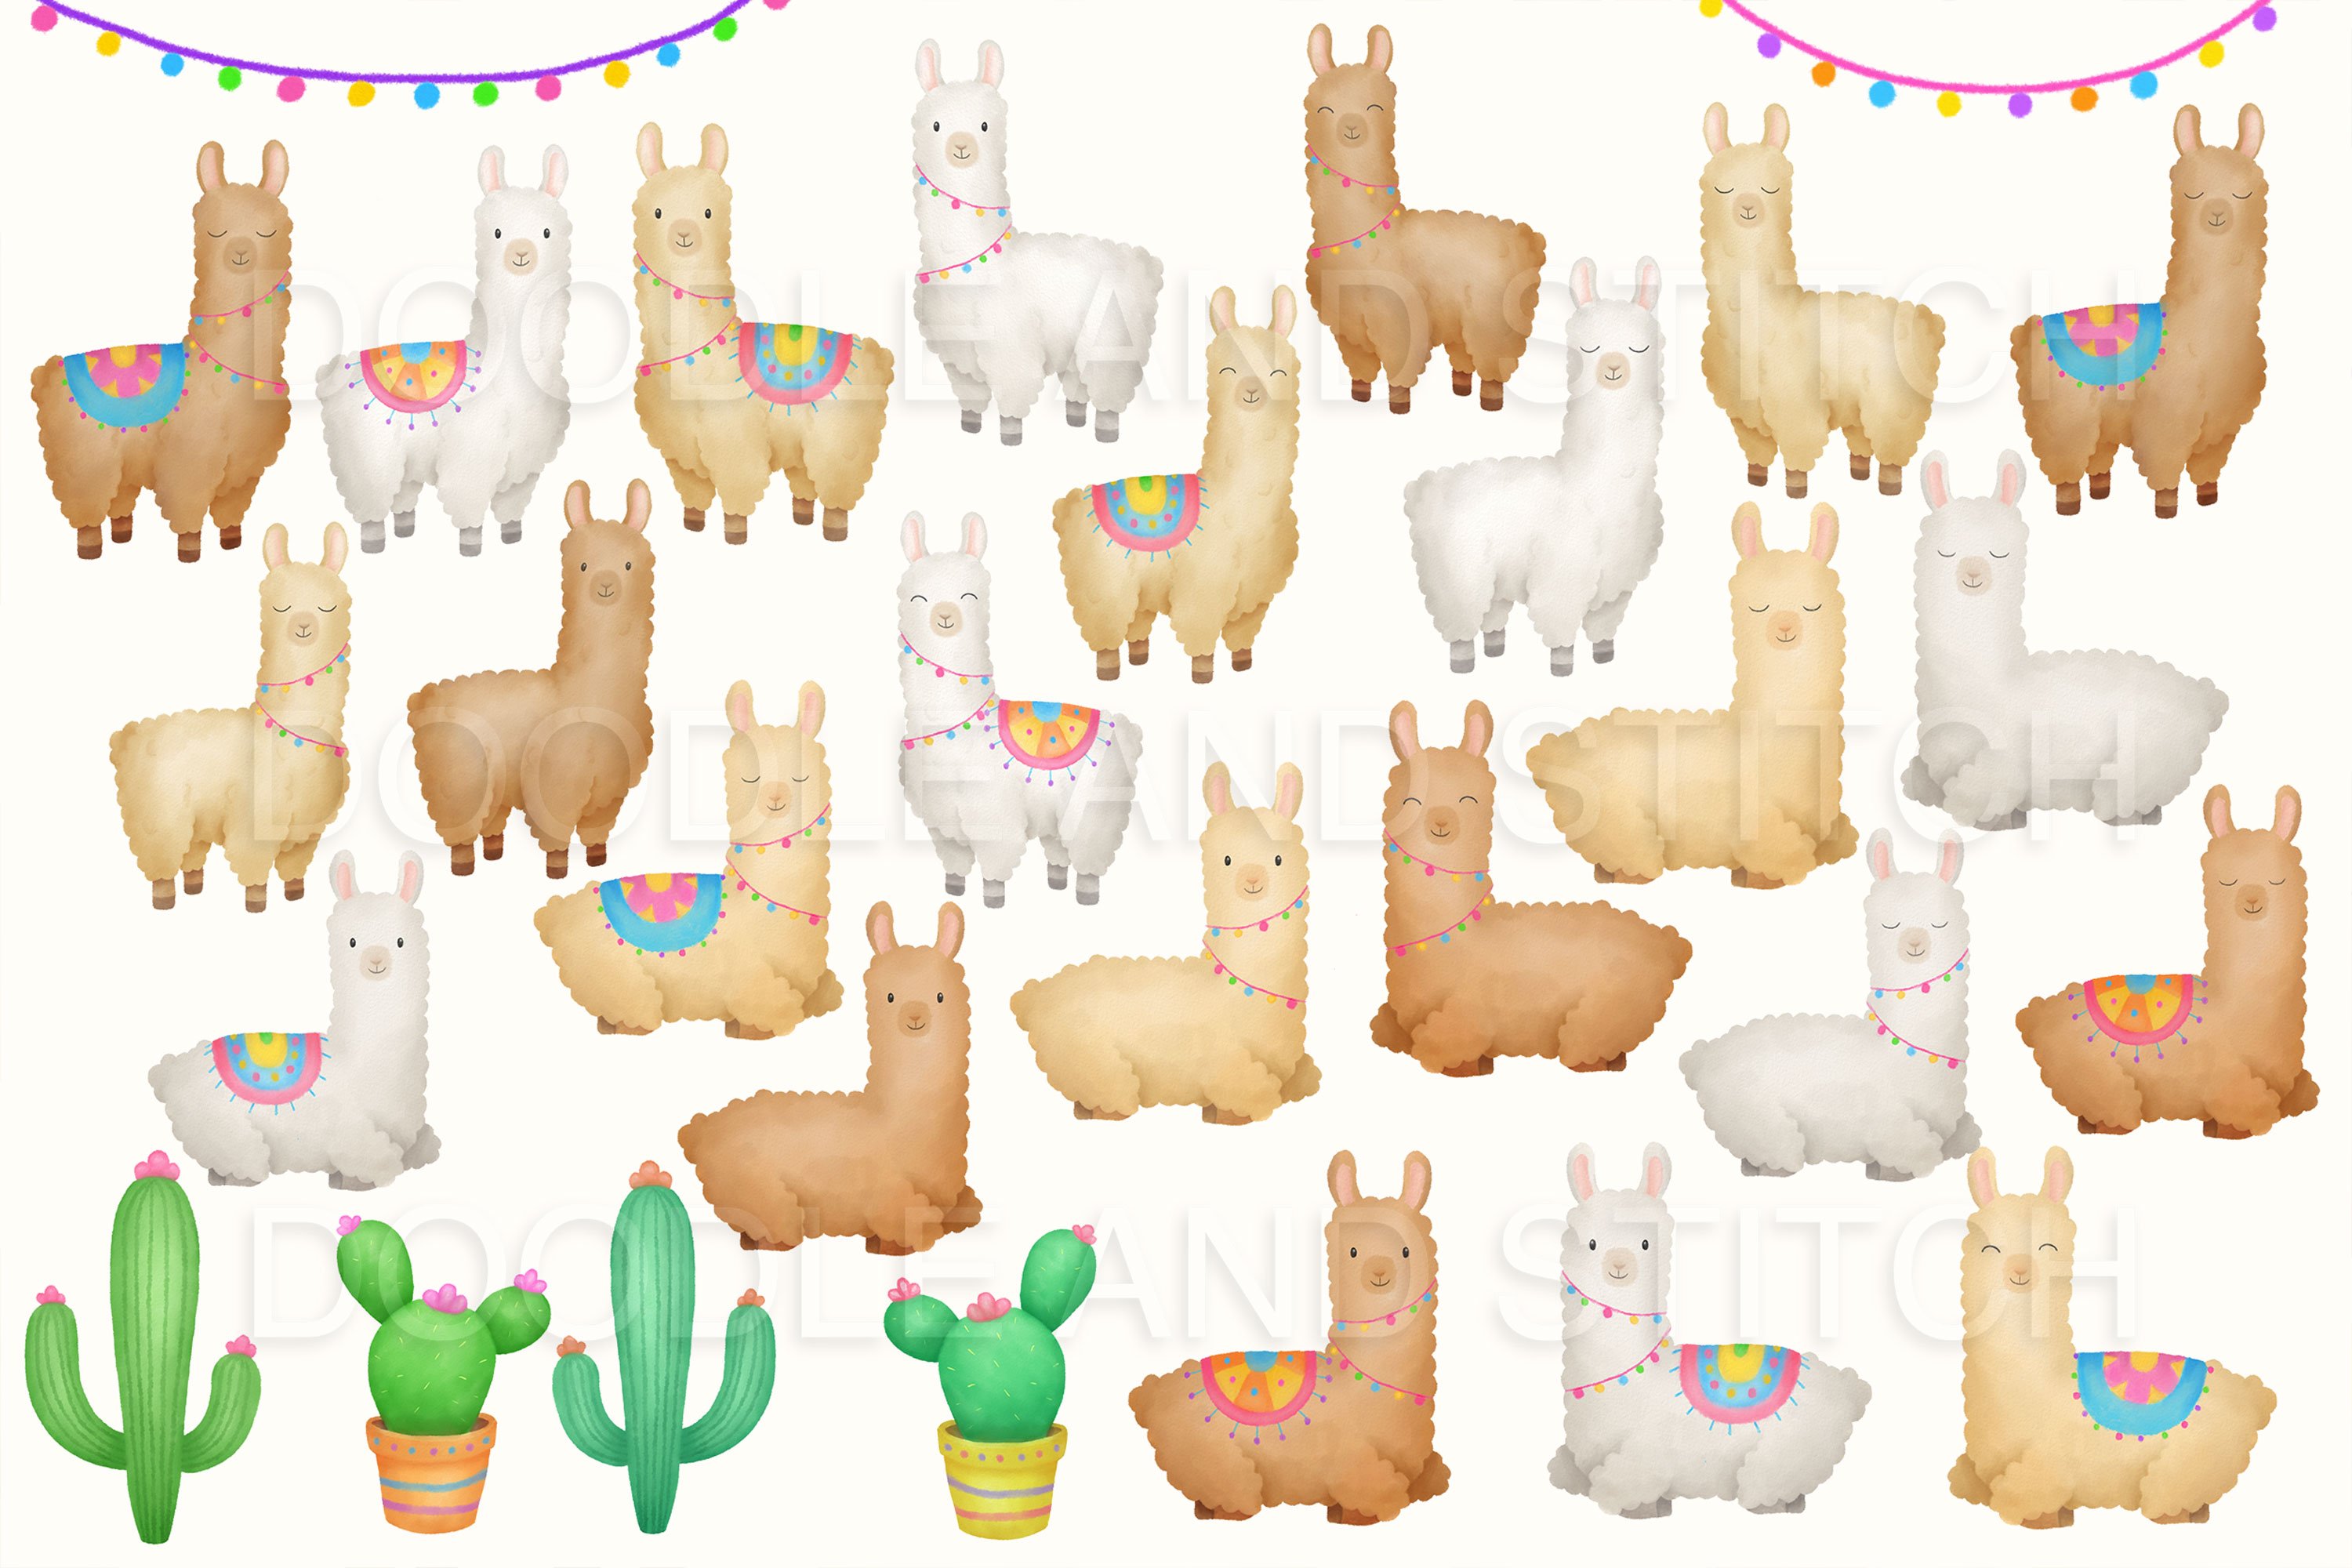 Llama and Alpacas Illustrations preview image.